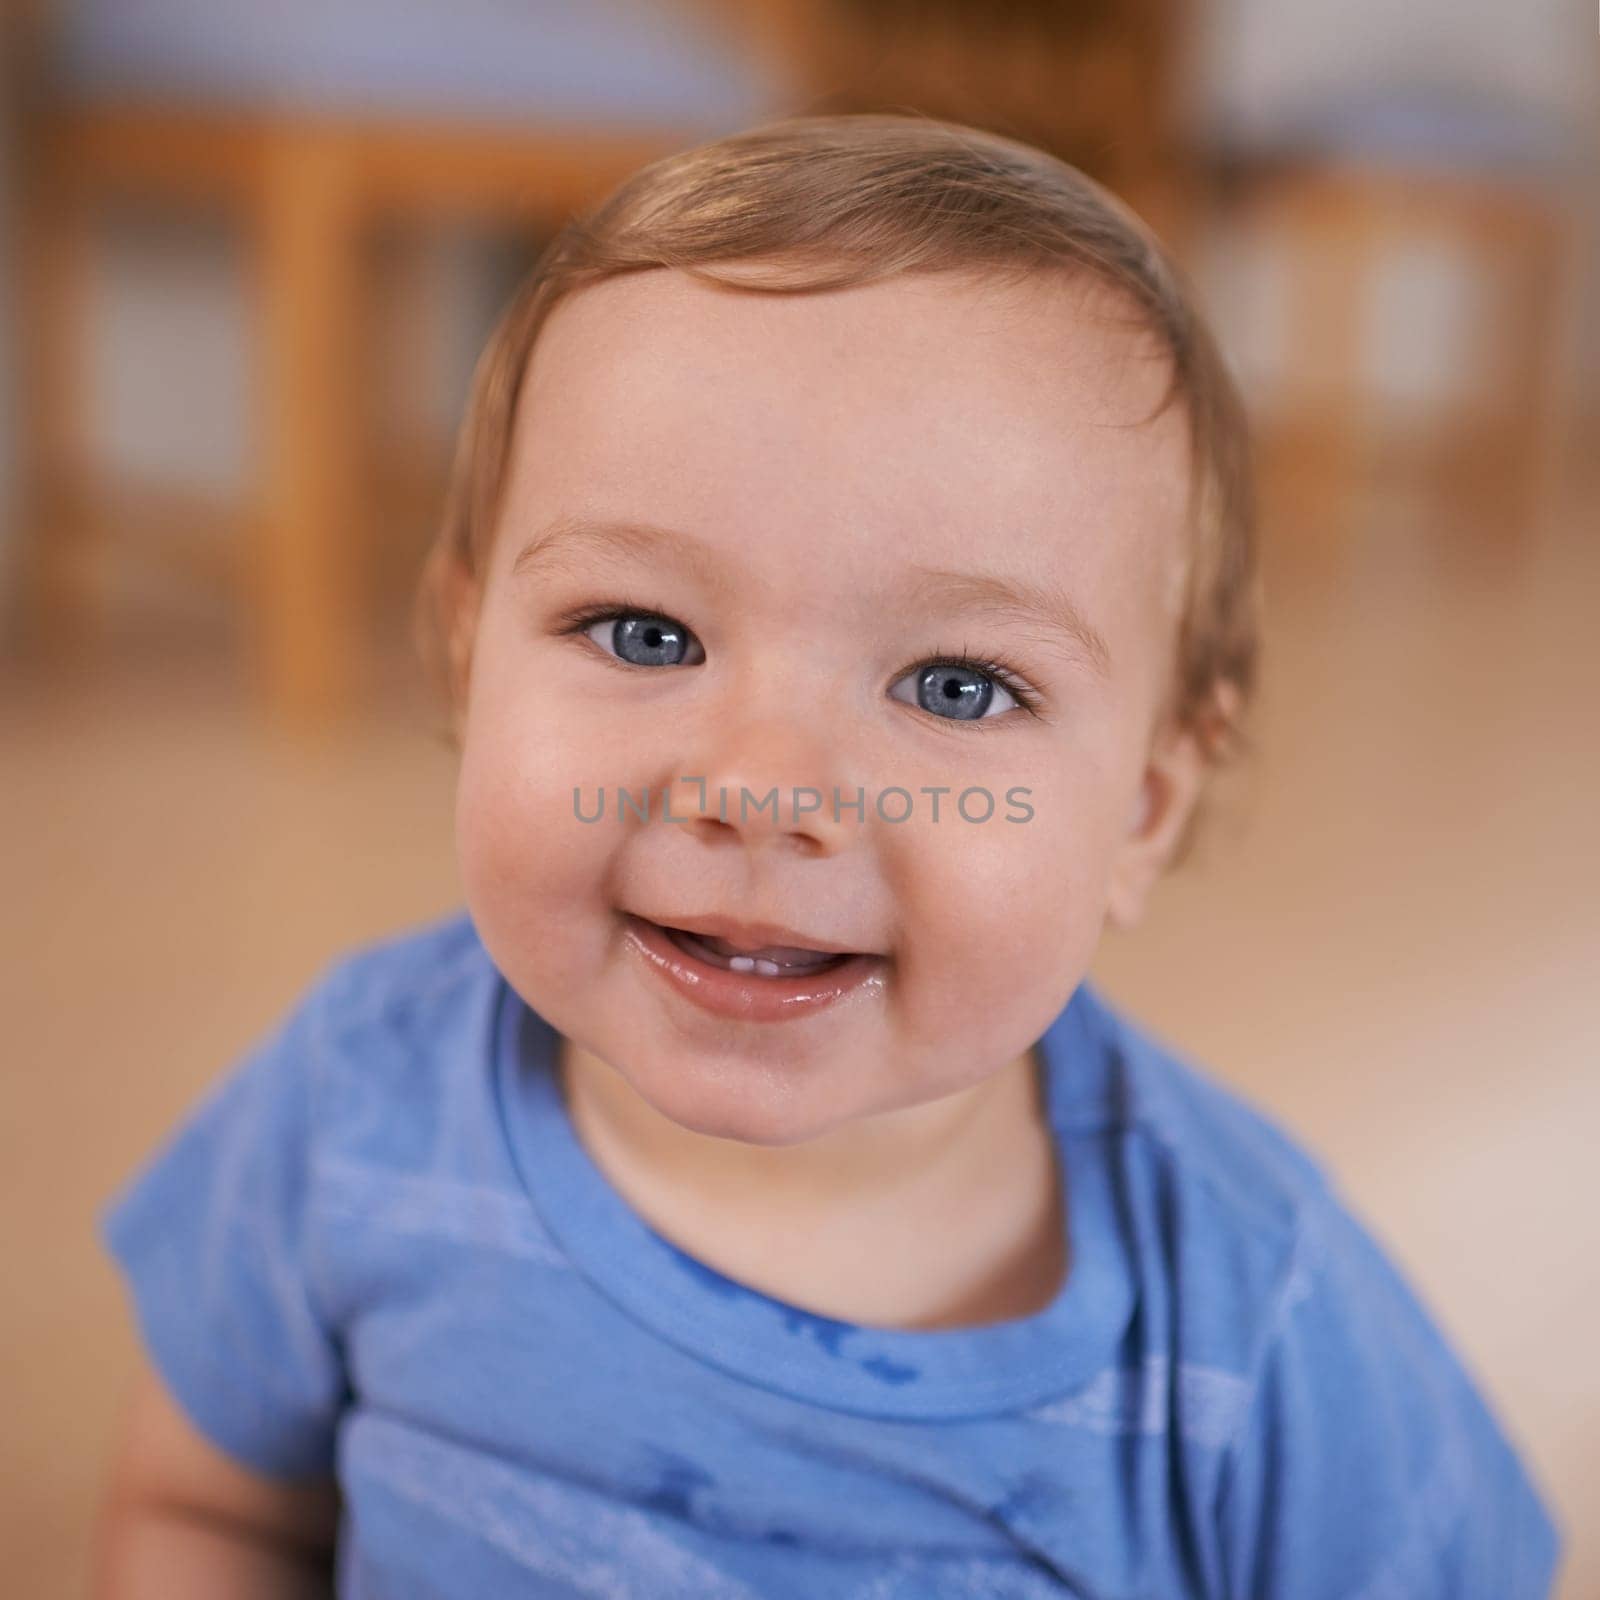 Toddler, smile and portrait of baby in home for fun playing, happiness or learning in living room. Relax, healthy boy or face of a male kid on floor for child development or growth in a house alone.